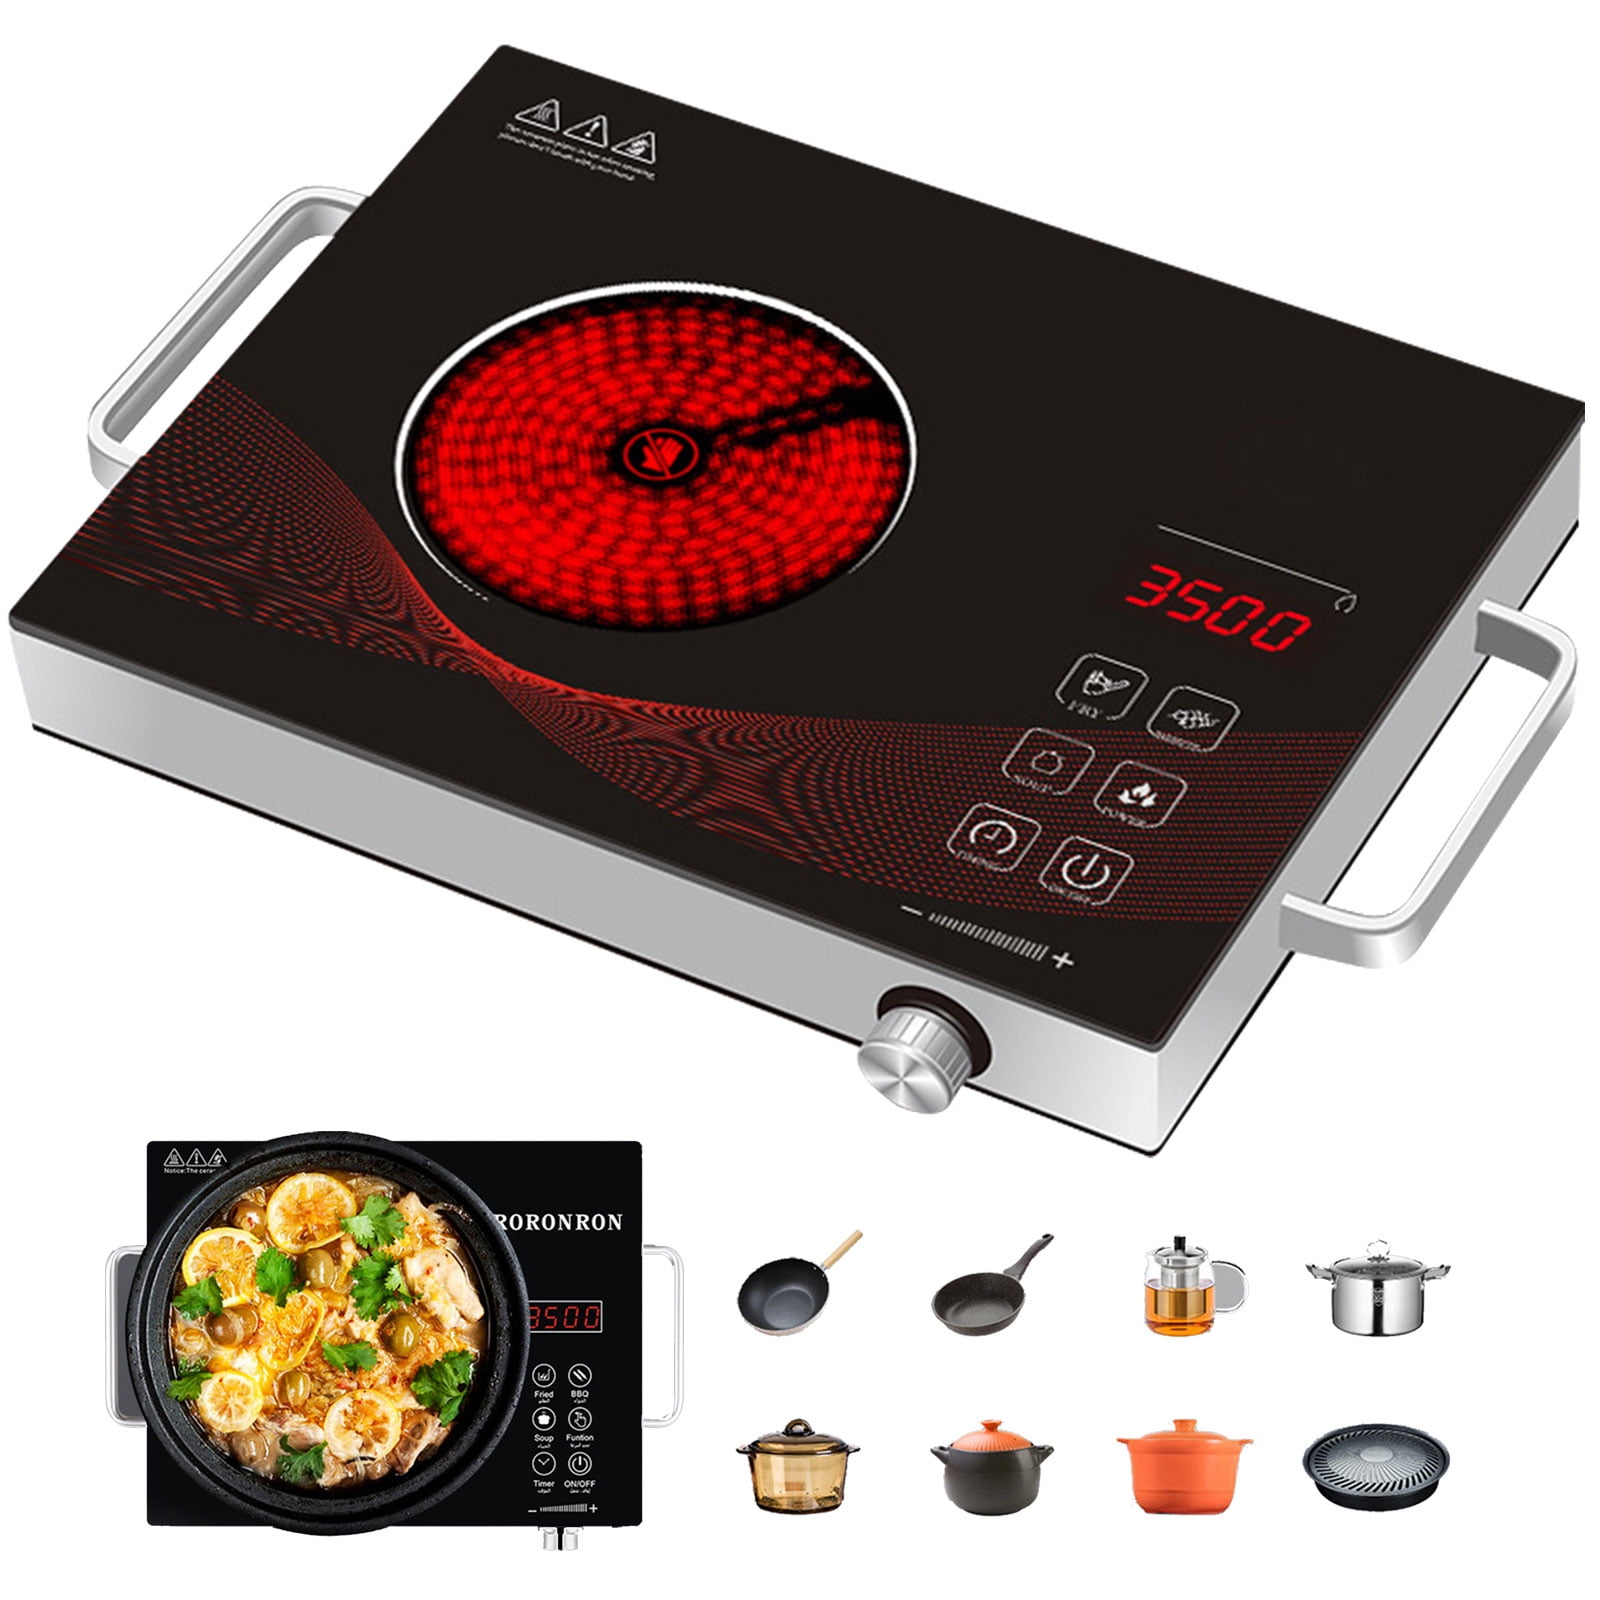 HM SHOCKPROOF INFRARED COOKTOP Electric Cooking Heater Price in